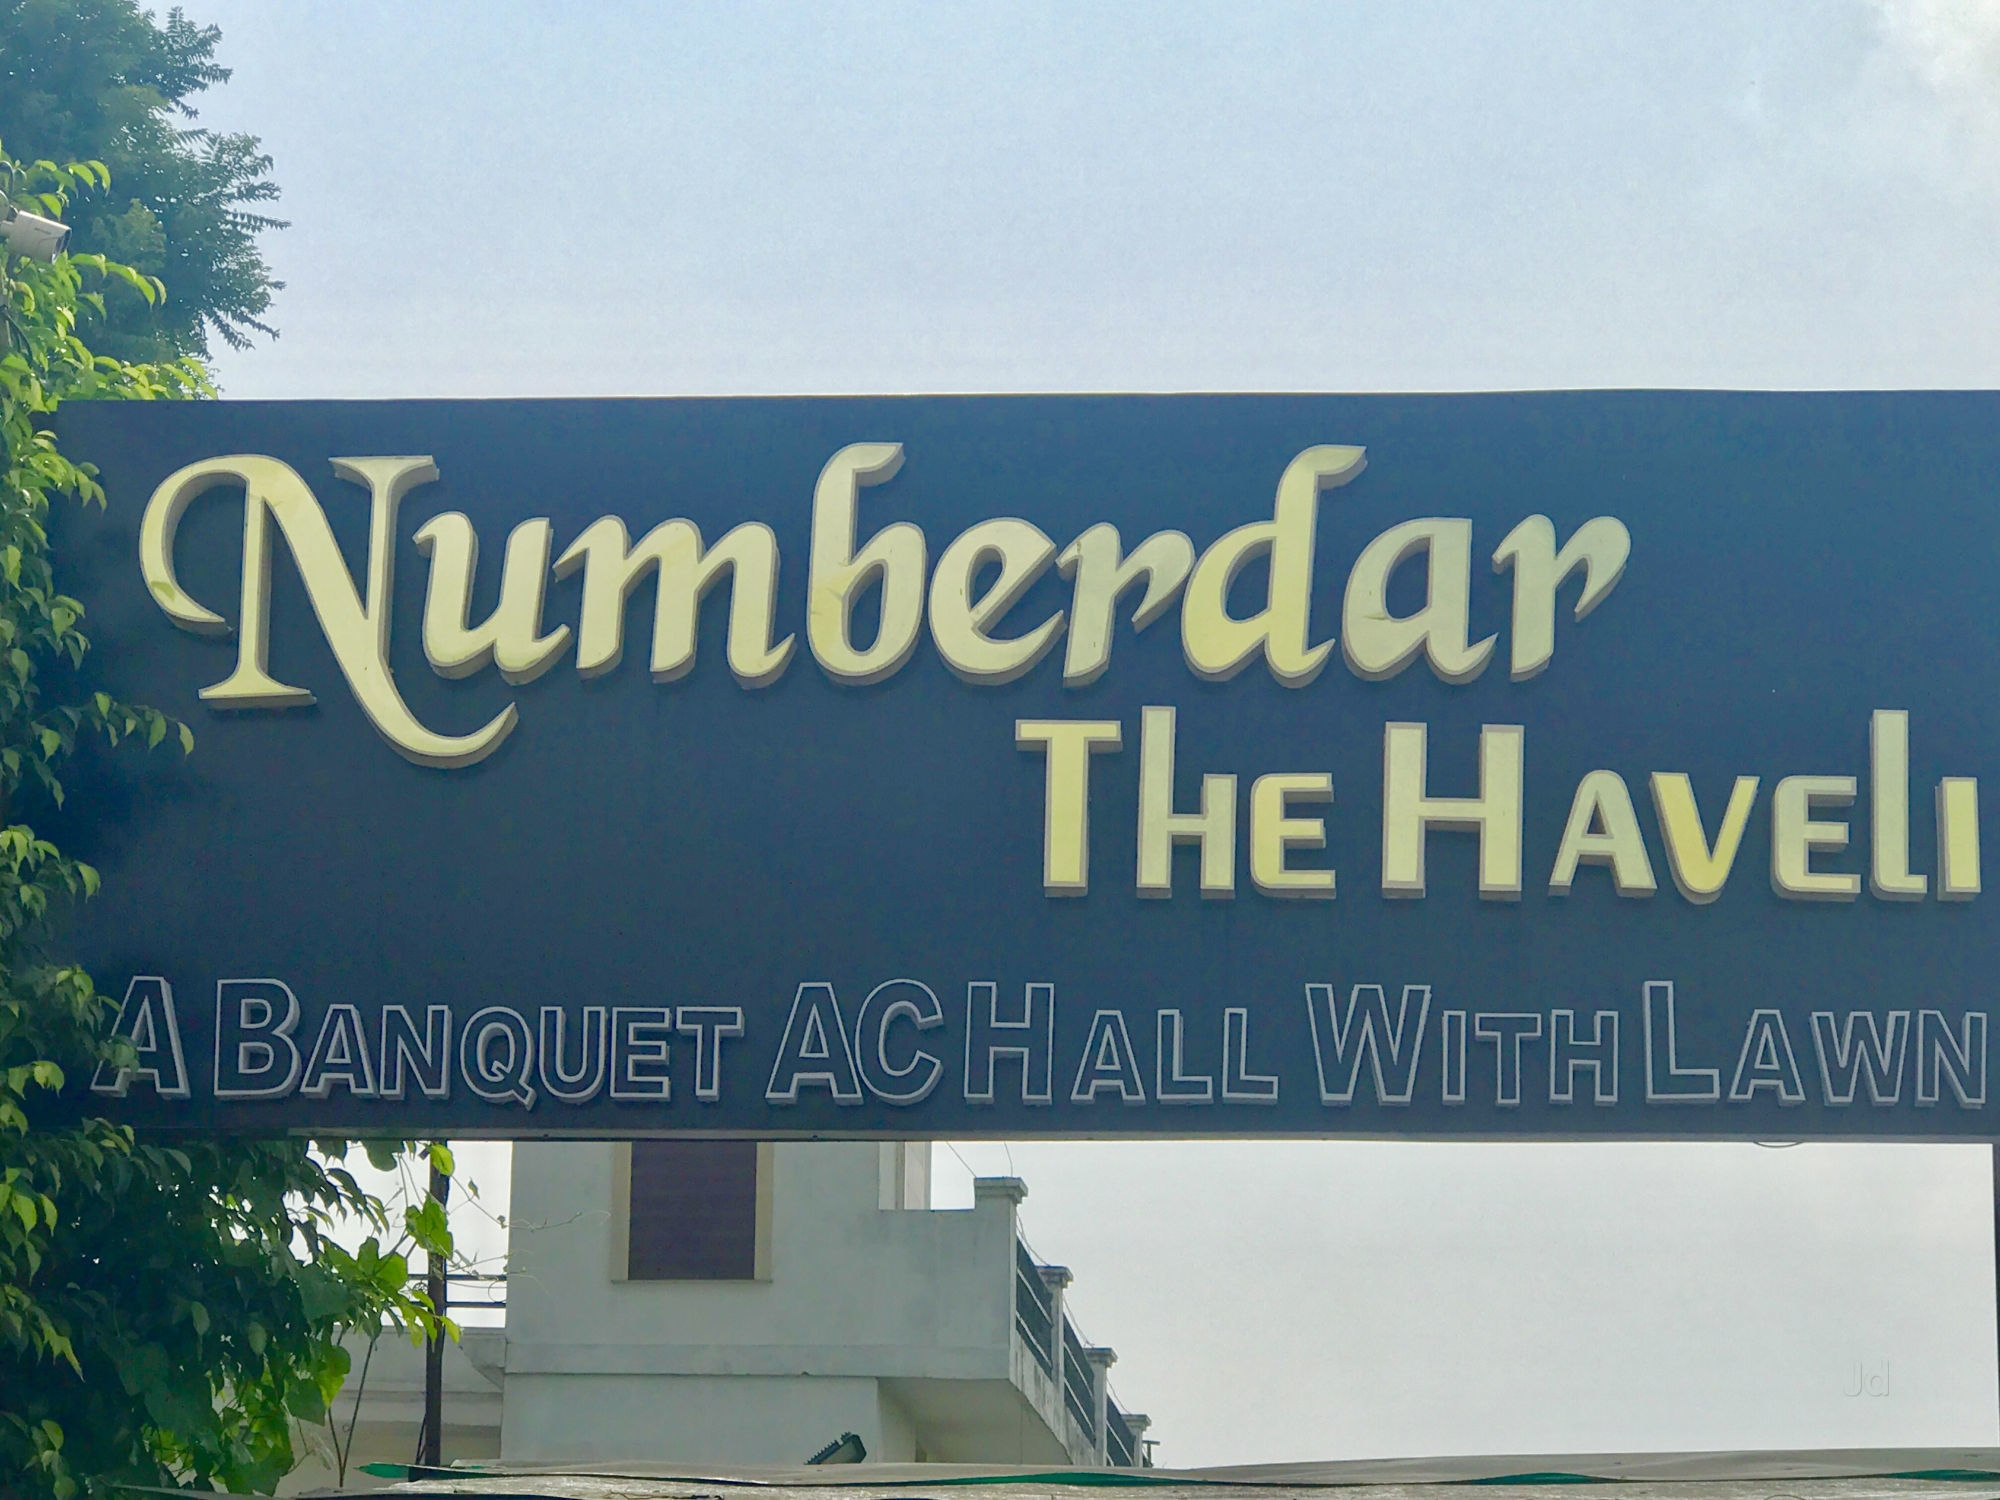 Nambardaar The Haveli|Catering Services|Event Services